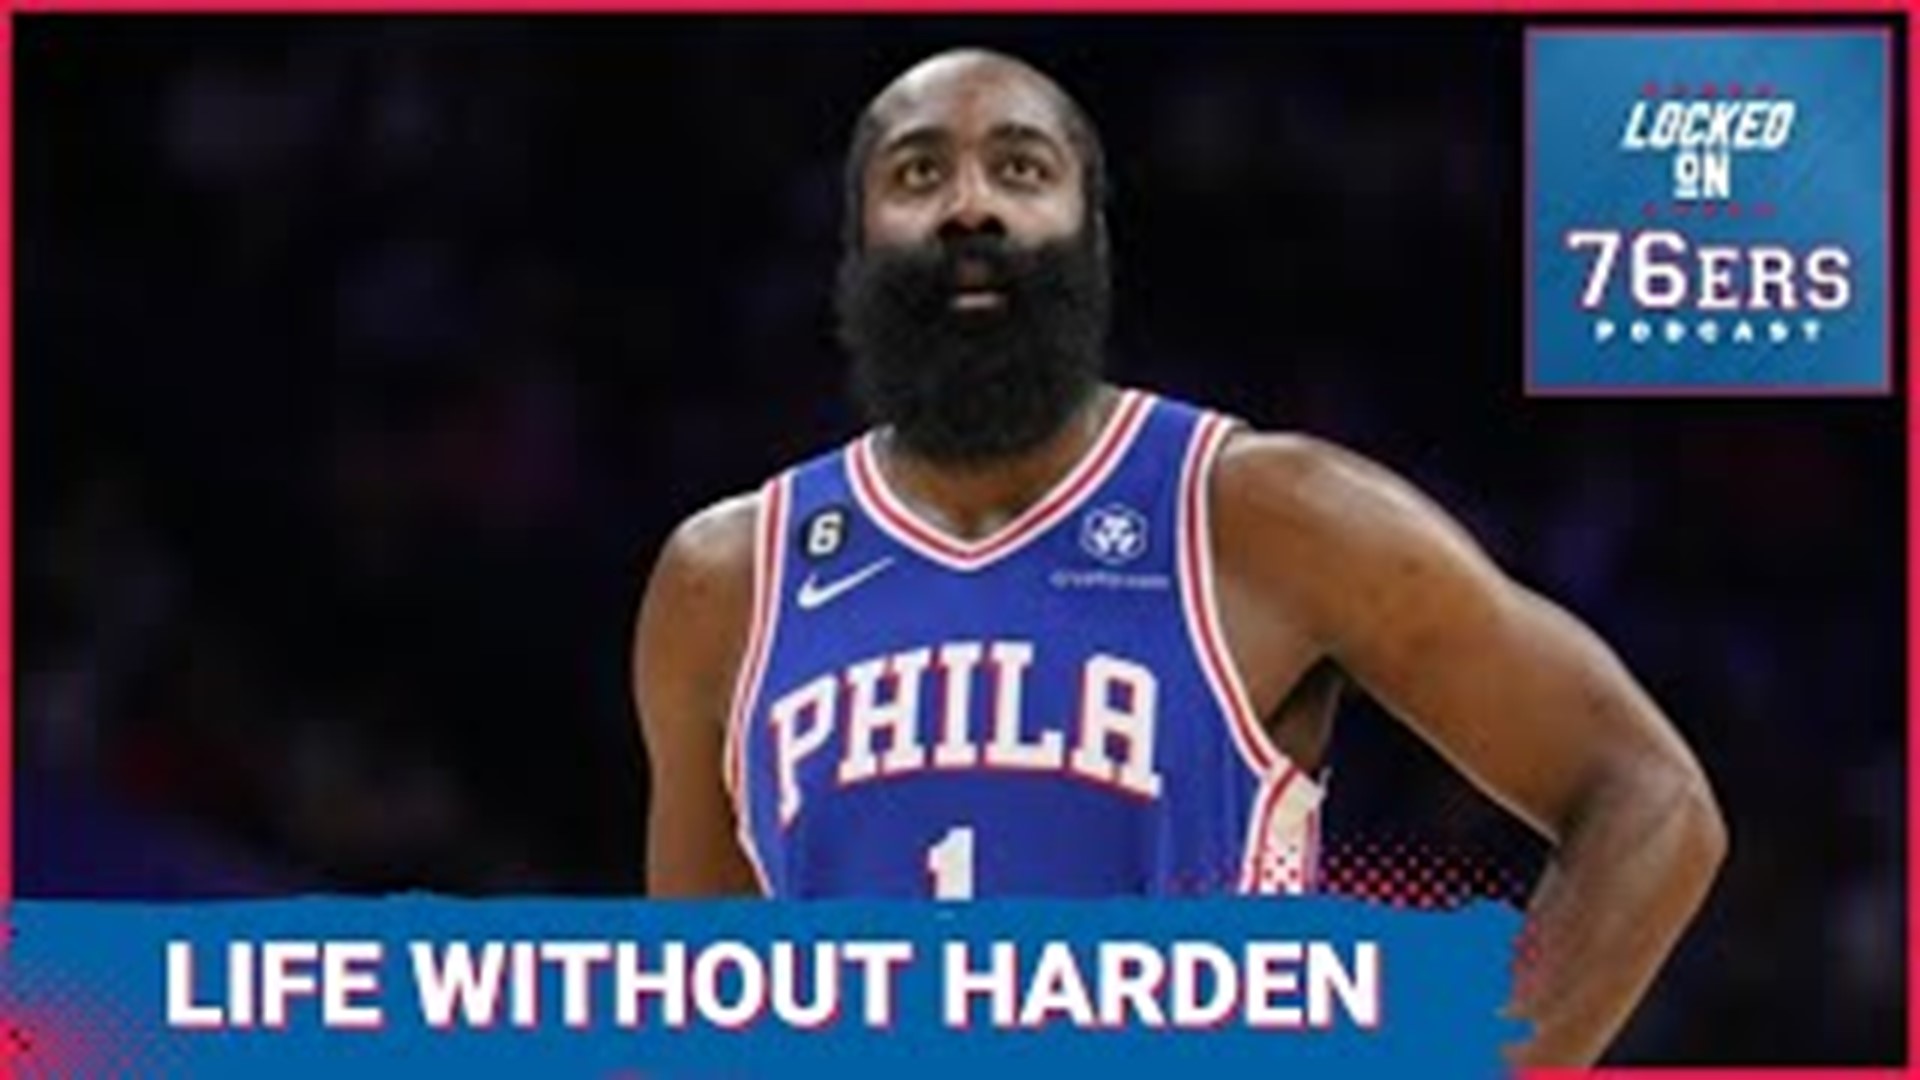 Devon Givens and Keith Pompey dissect the 76ers play in the past five games without James Harden.